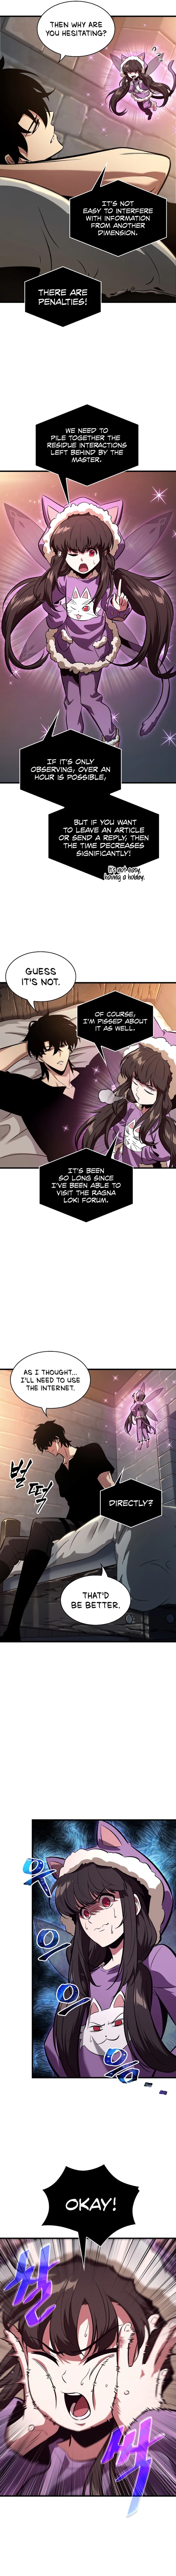 Pick Me Up - Chapter 41 Page 8